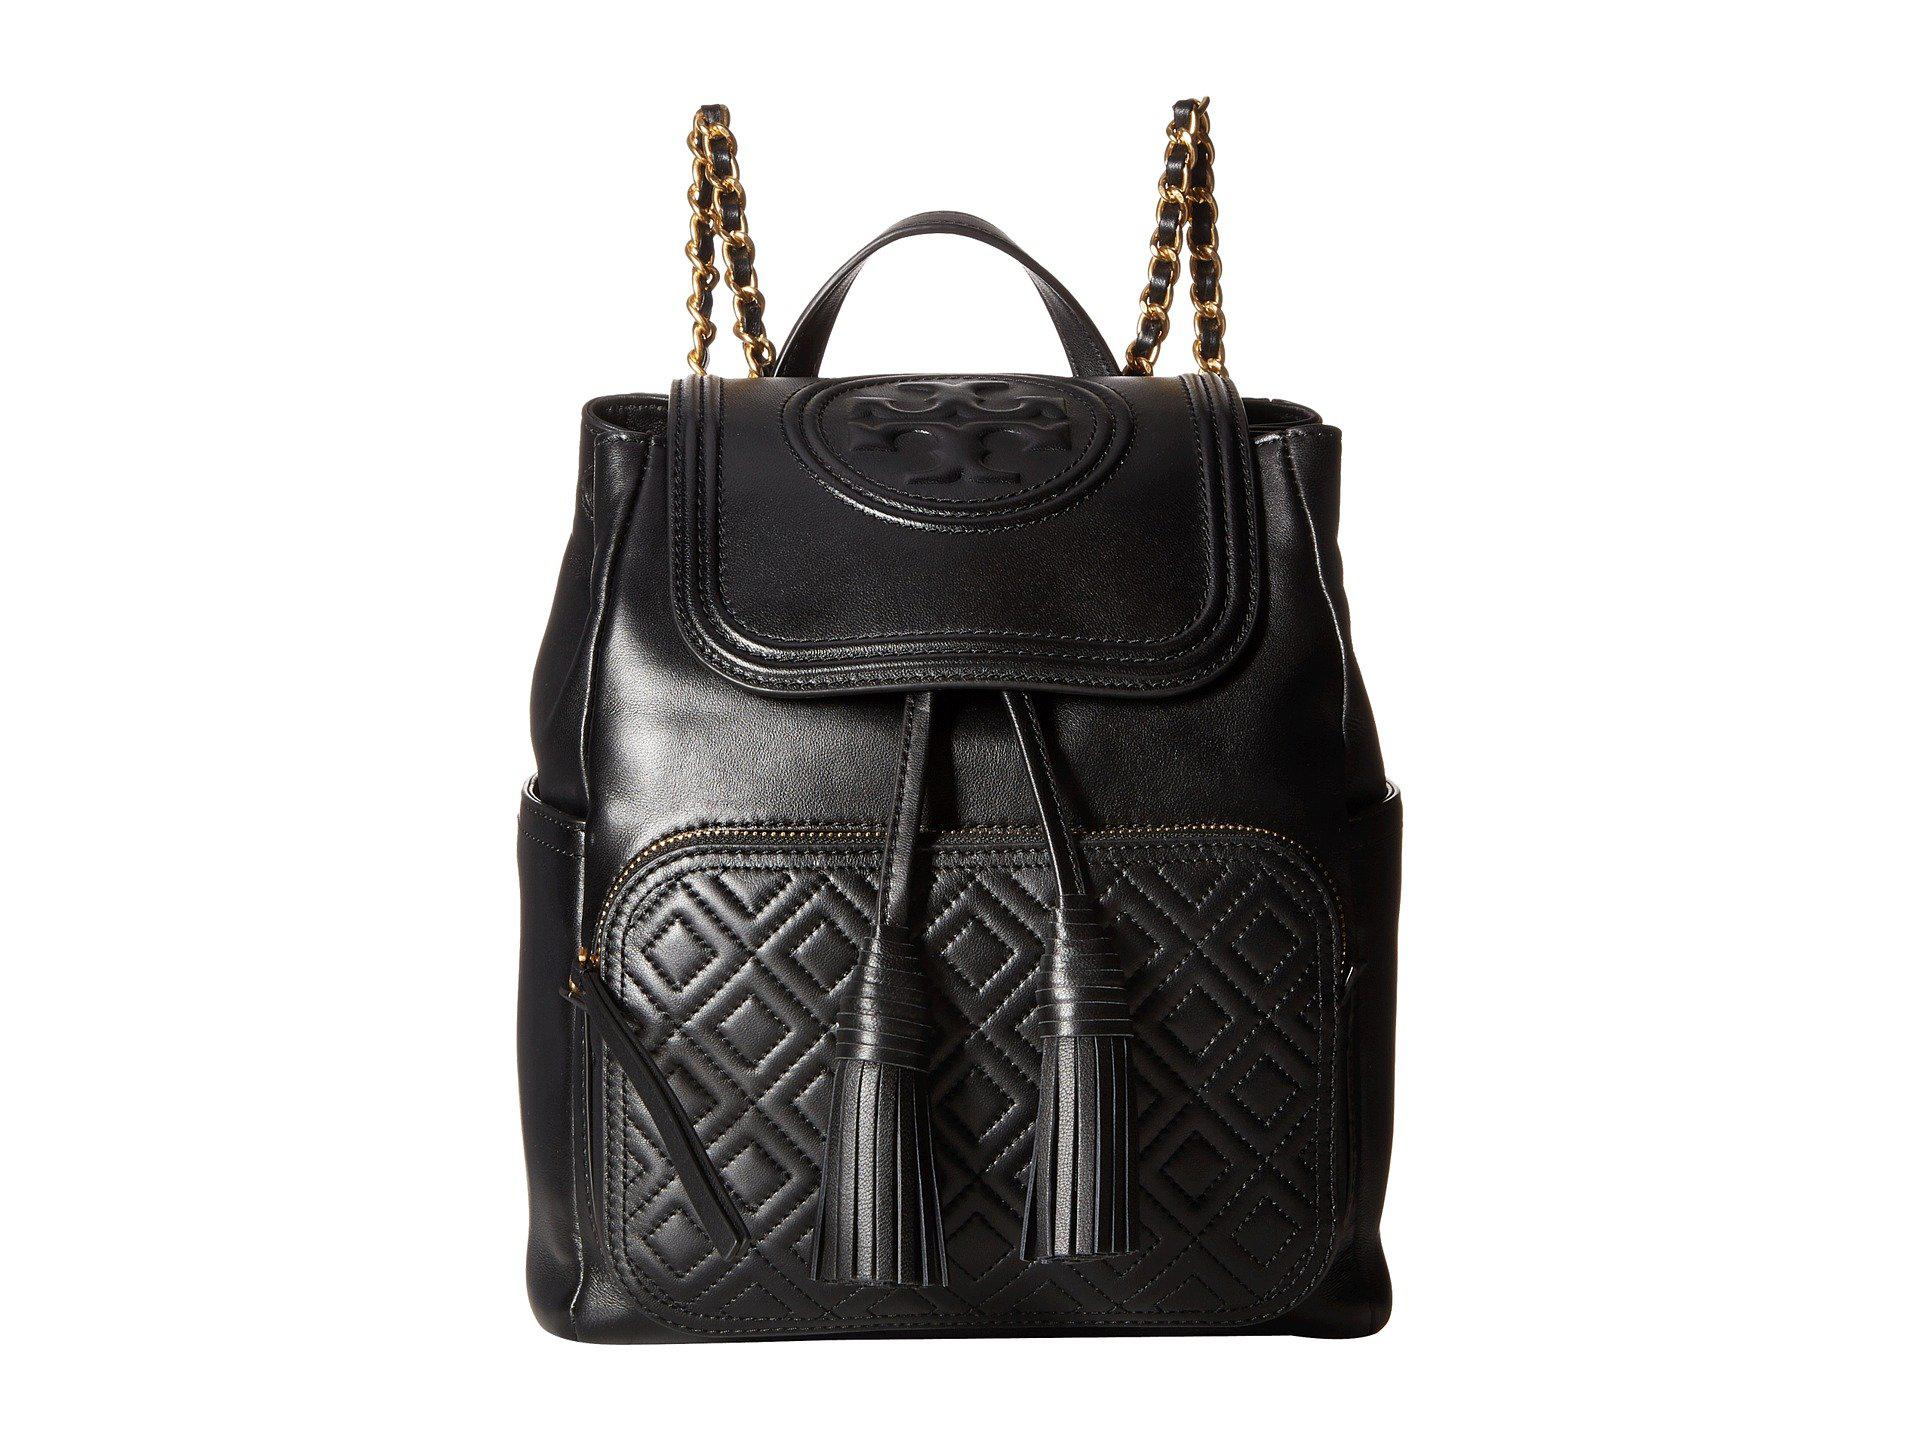 Tory Burch Fleming Backpack Offers Online, Save 66% | jlcatj.gob.mx